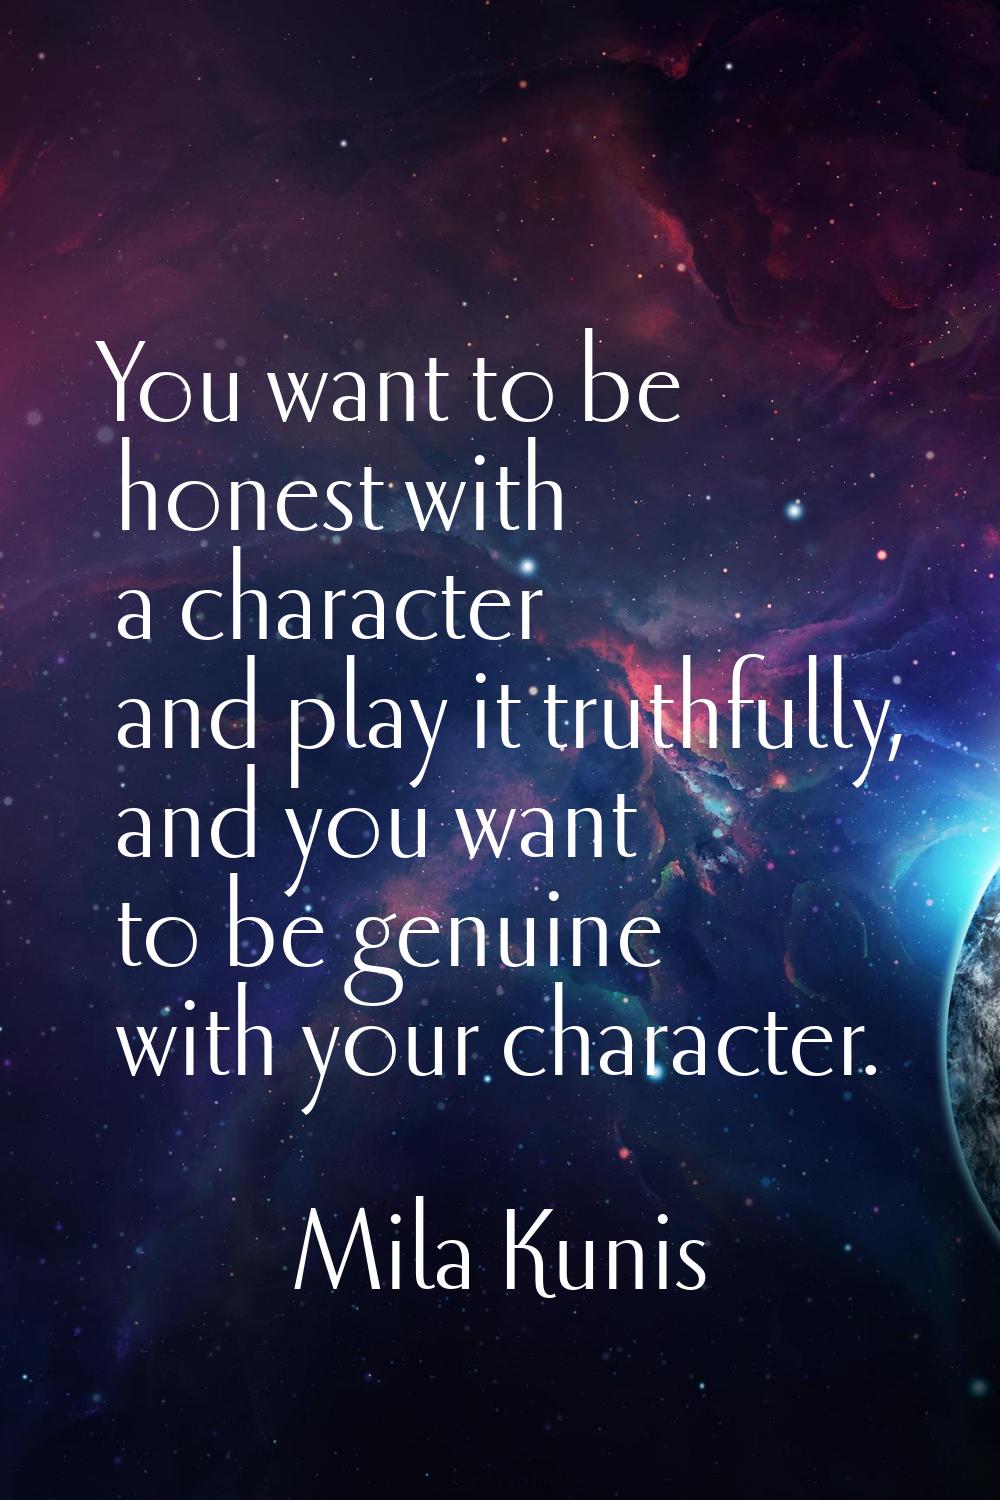 You want to be honest with a character and play it truthfully, and you want to be genuine with your